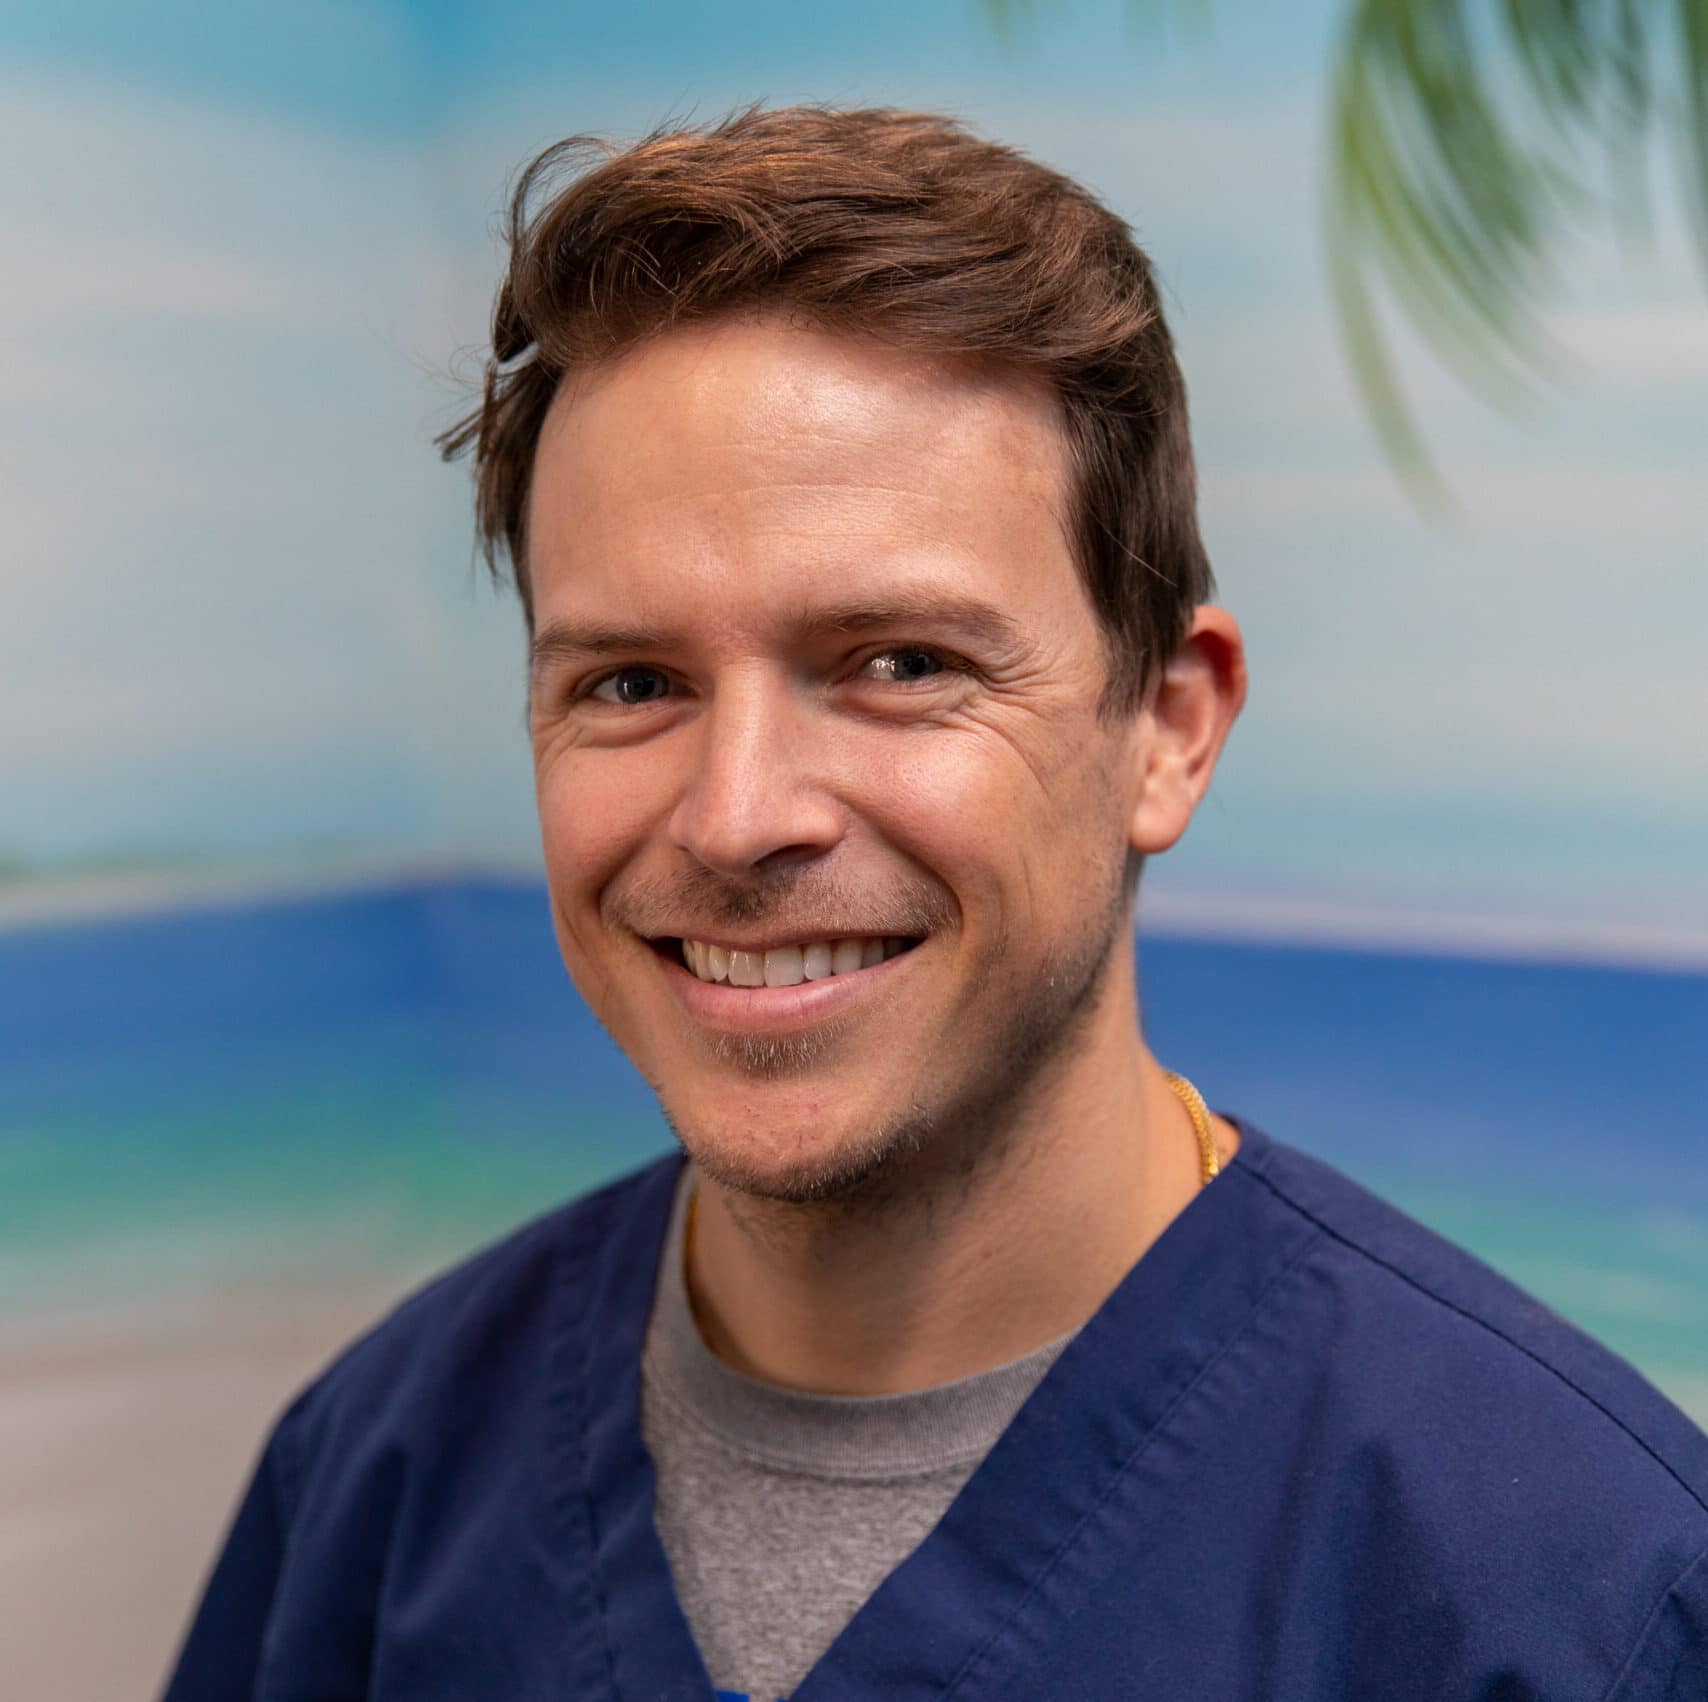 <a class="docLink" href="/palm-harbor/dental-implants/meet-our-doctors/#Charles">Read Bio</a>